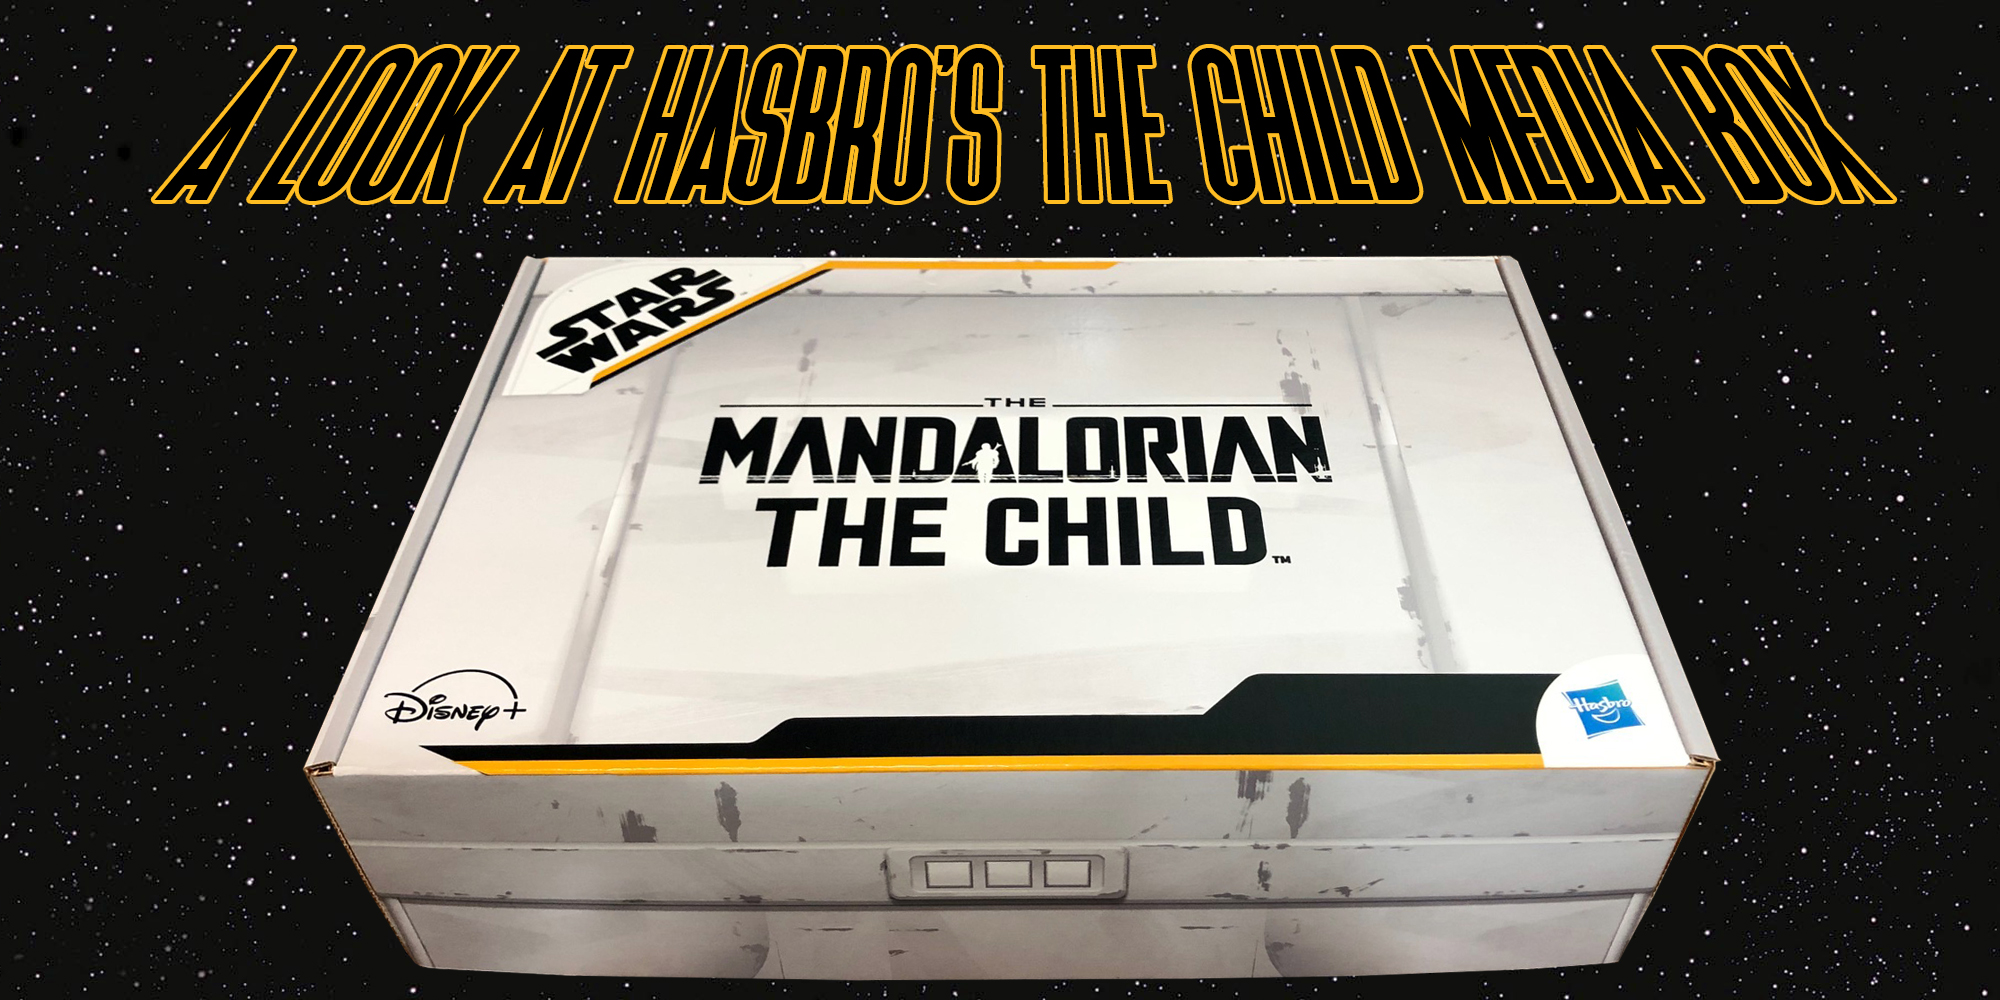 A Look At Habro's The Child Media Box